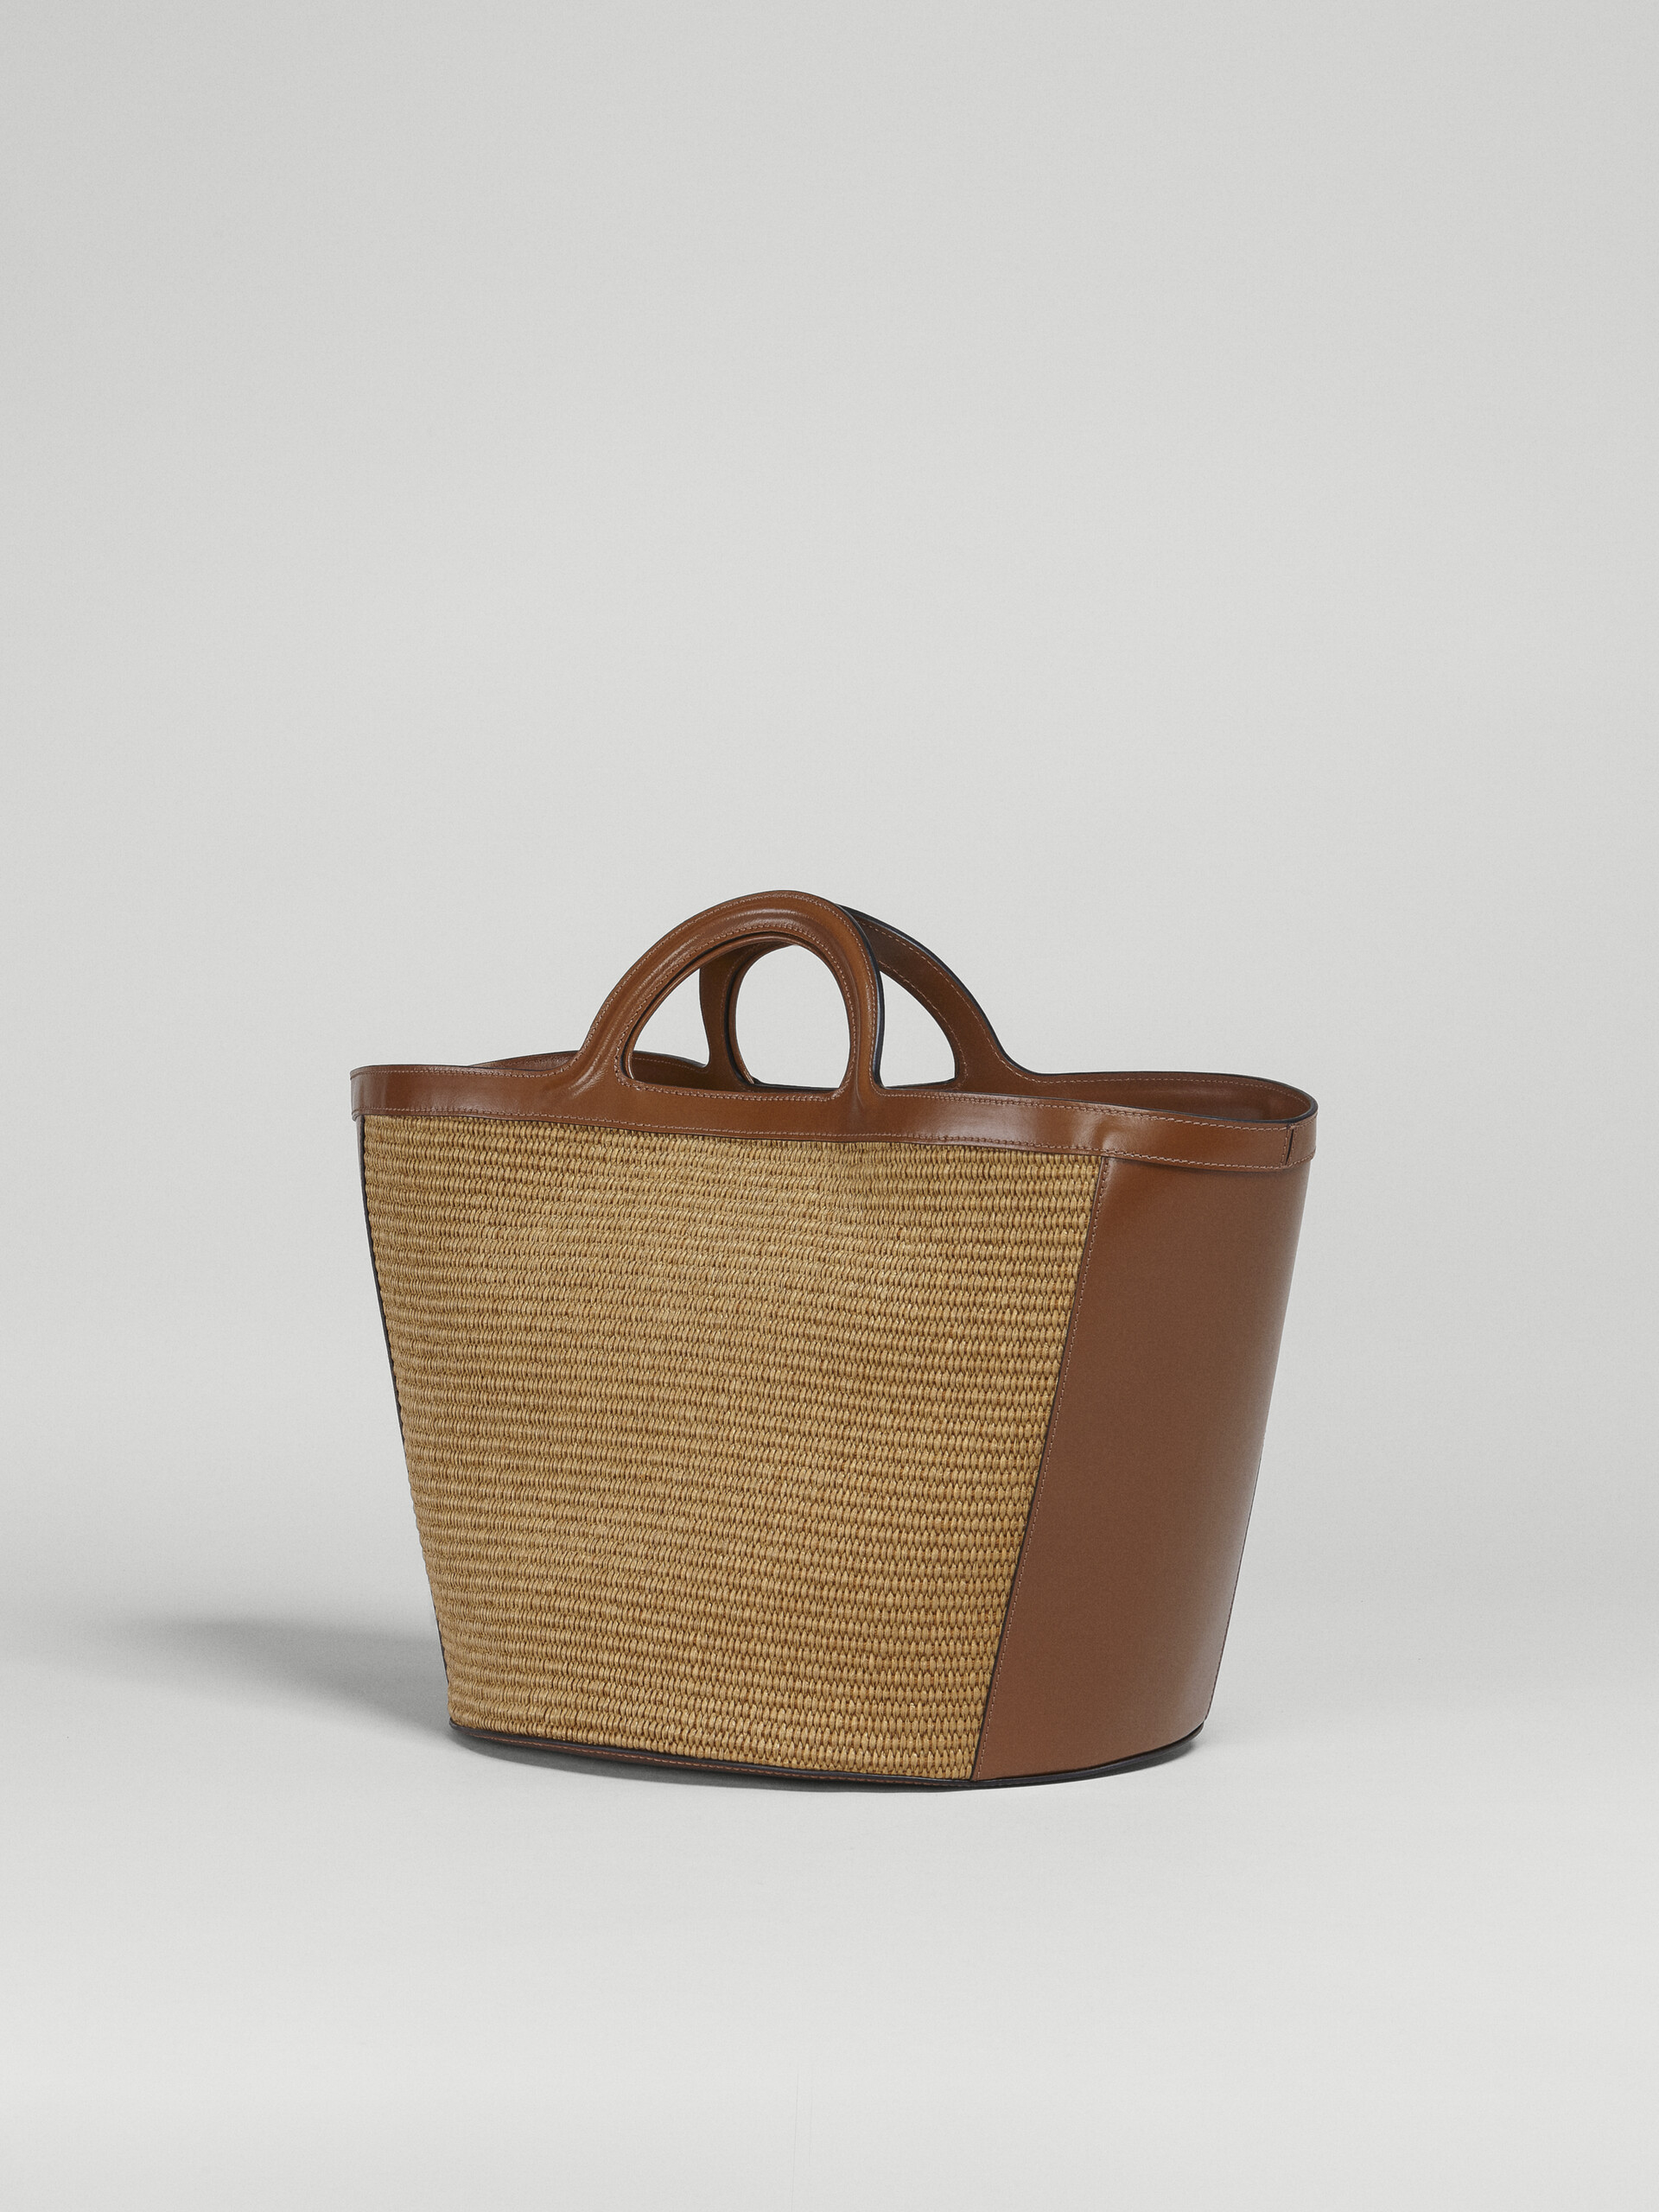 Tropicalia Large Bag in brown raffia-effect fabric and leather - Handbags - Image 3